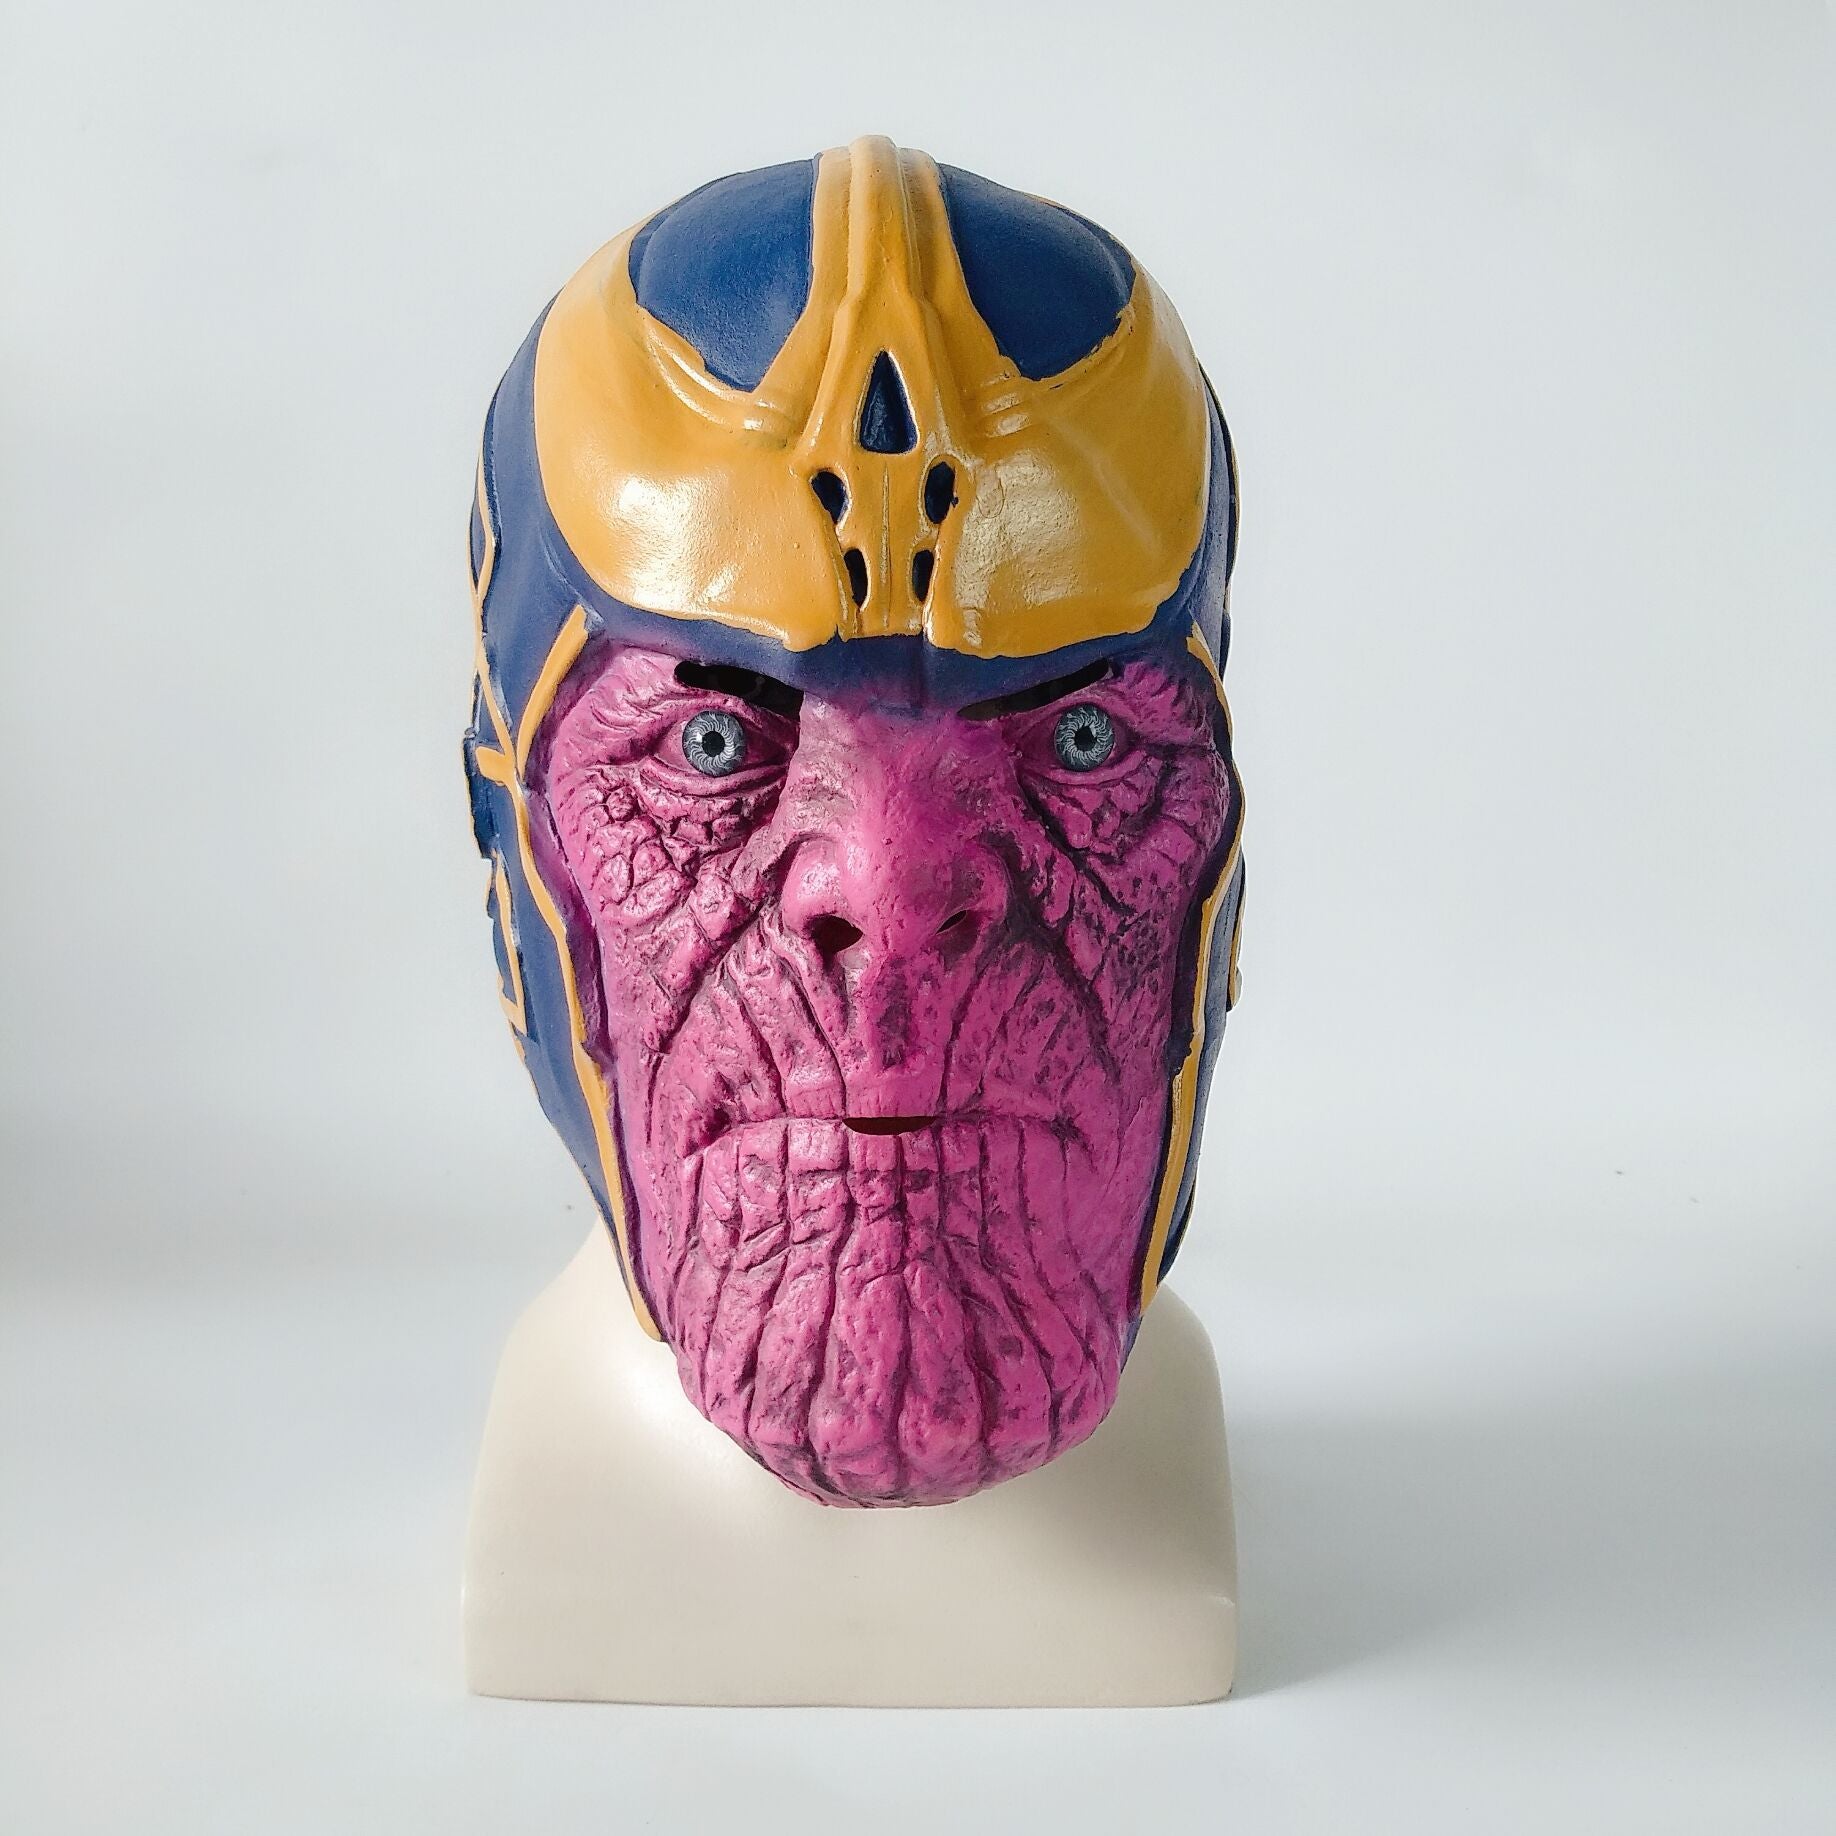 The Avengers Thanos Mask for Halloweens-For Halloween-Red Mask-Free Shipping at meselling99